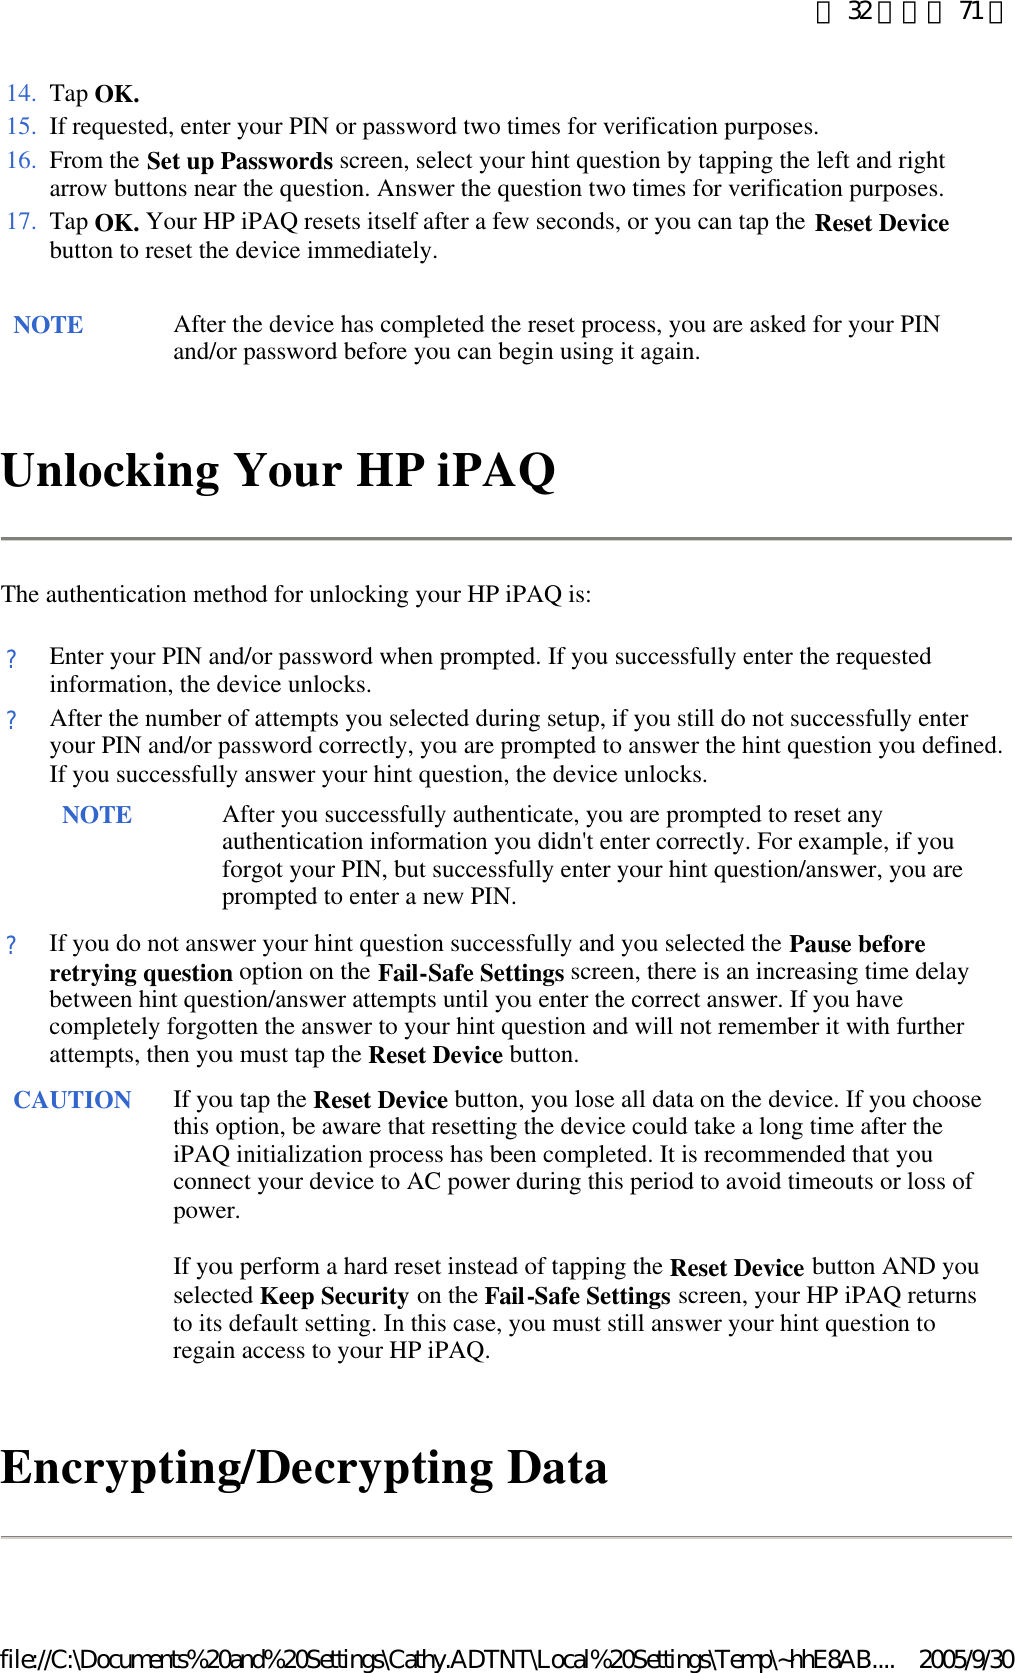 Unlocking Your HP iPAQ The authentication method for unlocking your HP iPAQ is: Encrypting/Decrypting Data 14. Tap OK.15. If requested, enter your PIN or password two times for verification purposes.16. From the Set up Passwords screen, select your hint question by tapping the left and right arrow buttons near the question. Answer the question two times for verification purposes. 17. Tap OK. Your HP iPAQ resets itself after a few seconds, or you can tap the Reset Device button to reset the device immediately. NOTE After the device has completed the reset process, you are asked for your PIN and/or password before you can begin using it again.  ?Enter your PIN and/or password when prompted. If you successfully enter the requested information, the device unlocks.?After the number of attempts you selected during setup, if you still do not successfully enter your PIN and/or password correctly, you are prompted to answer the hint question you defined. If you successfully answer your hint question, the device unlocks. NOTE After you successfully authenticate, you are prompted to reset any authentication information you didn&apos;t enter correctly. For example, if you forgot your PIN, but successfully enter your hint question/answer, you are prompted to enter a new PIN.  ?If you do not answer your hint question successfully and you selected the Pause before retrying question option on the Fail-Safe Settings screen, there is an increasing time delay between hint question/answer attempts until you enter the correct answer. If you have completely forgotten the answer to your hint question and will not remember it with further attempts, then you must tap the Reset Device button. CAUTION If you tap the Reset Device button, you lose all data on the device. If you choose this option, be aware that resetting the device could take a long time after the iPAQ initialization process has been completed. It is recommended that you connect your device to AC power during this period to avoid timeouts or loss of power.  If you perform a hard reset instead of tapping the Reset Device button AND you selected Keep Security on the Fail-Safe Settings screen, your HP iPAQ returns to its default setting. In this case, you must still answer your hint question to regain access to your HP iPAQ.  第 32 頁，共 71 頁2005/9/30file://C:\Documents%20and%20Settings\Cathy.ADTNT\Local%20Settings\Temp\~hhE8AB....